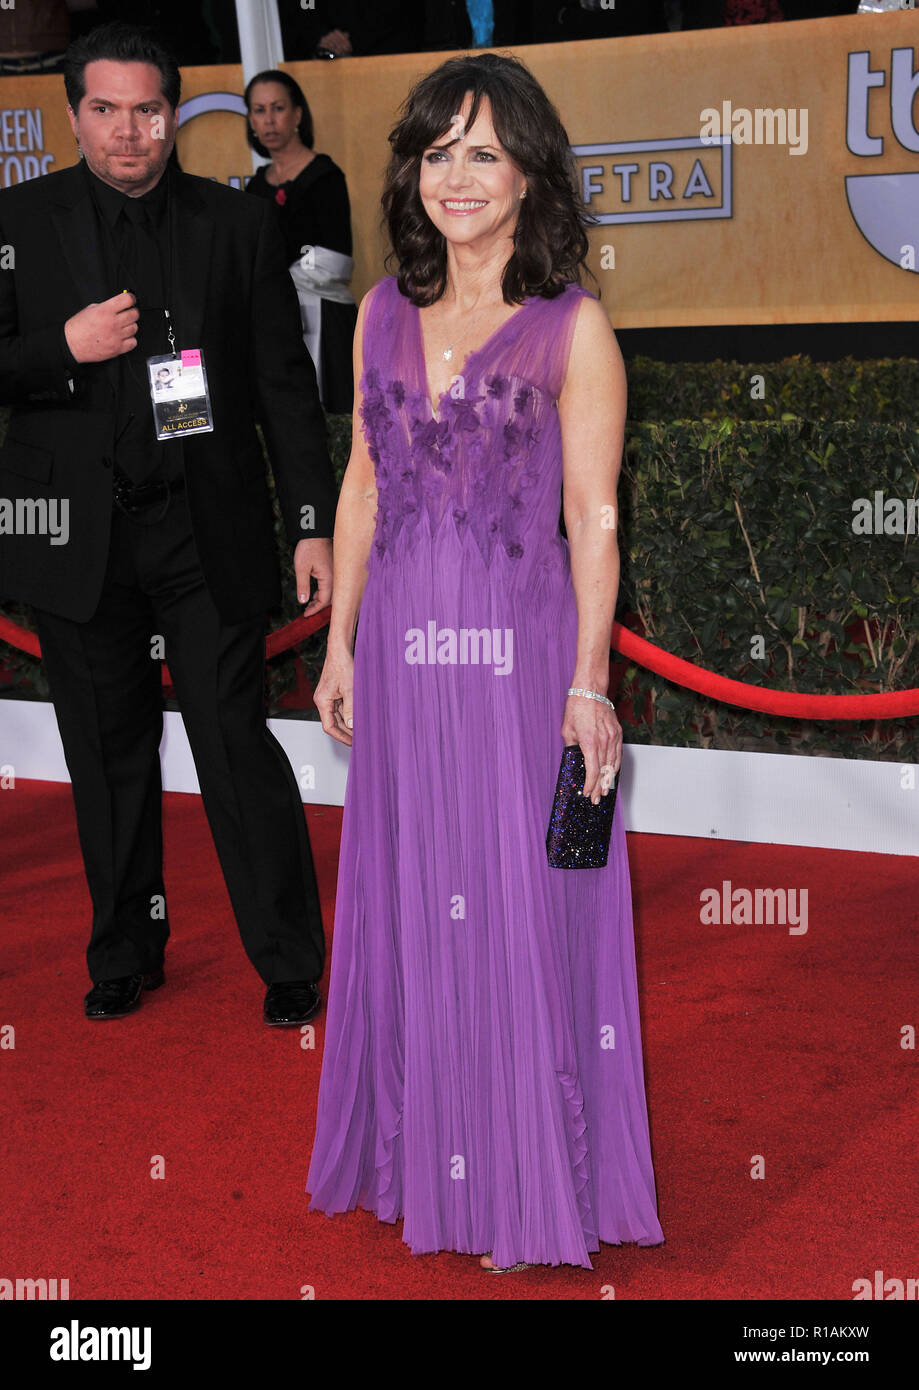 Sally Fields   the 19th Ann. SAG Awards 2013 at the Shrine Auditorium In Los Angeles.Sally Fields   Event in Hollywood Life - California, Red Carpet Event, USA, Film Industry, Celebrities, Photography, Bestof, Arts Culture and Entertainment, Topix Celebrities fashion, Best of, Hollywood Life, Event in Hollywood Life - California, Red Carpet and backstage, movie celebrities, TV celebrities, Music celebrities, Topix, Bestof, Arts Culture and Entertainment, vertical, one person, Photography,   Fashion, full length, 2013 inquiry tsuni@Gamma-USA.com , Credit Tsuni / USA, Stock Photo